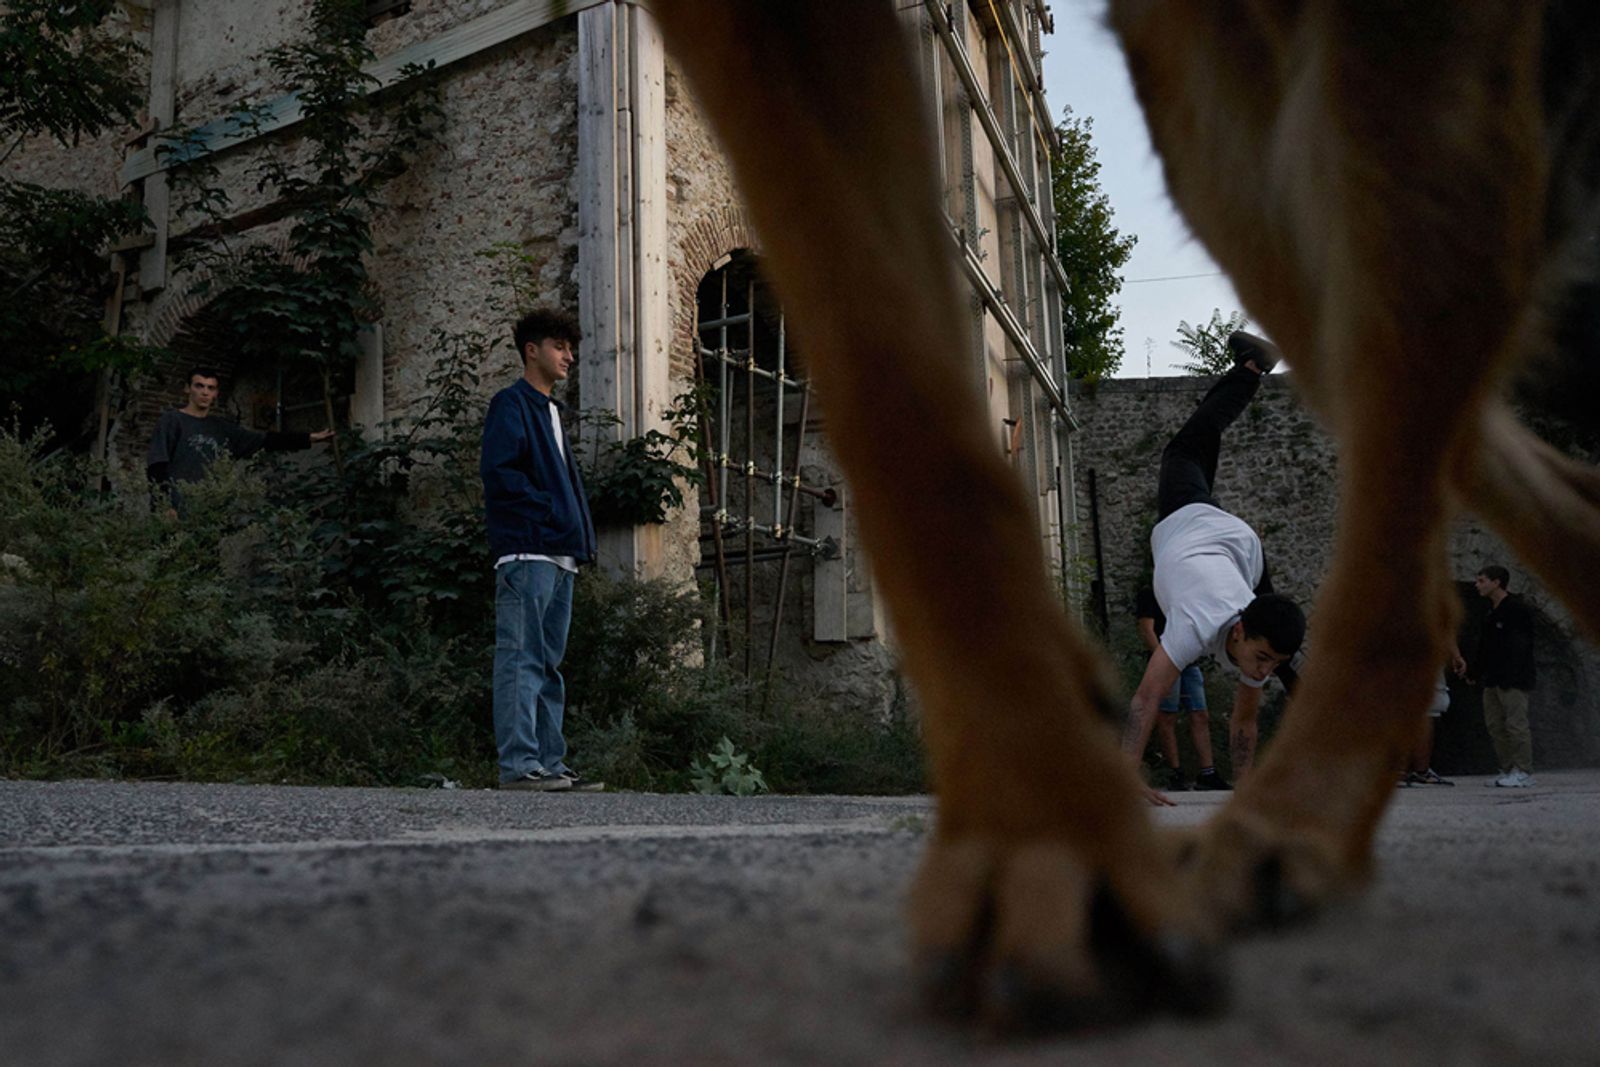 © Danilo Garcia Di Meo - the boys, with the dog of one of them, in the still earthquake city